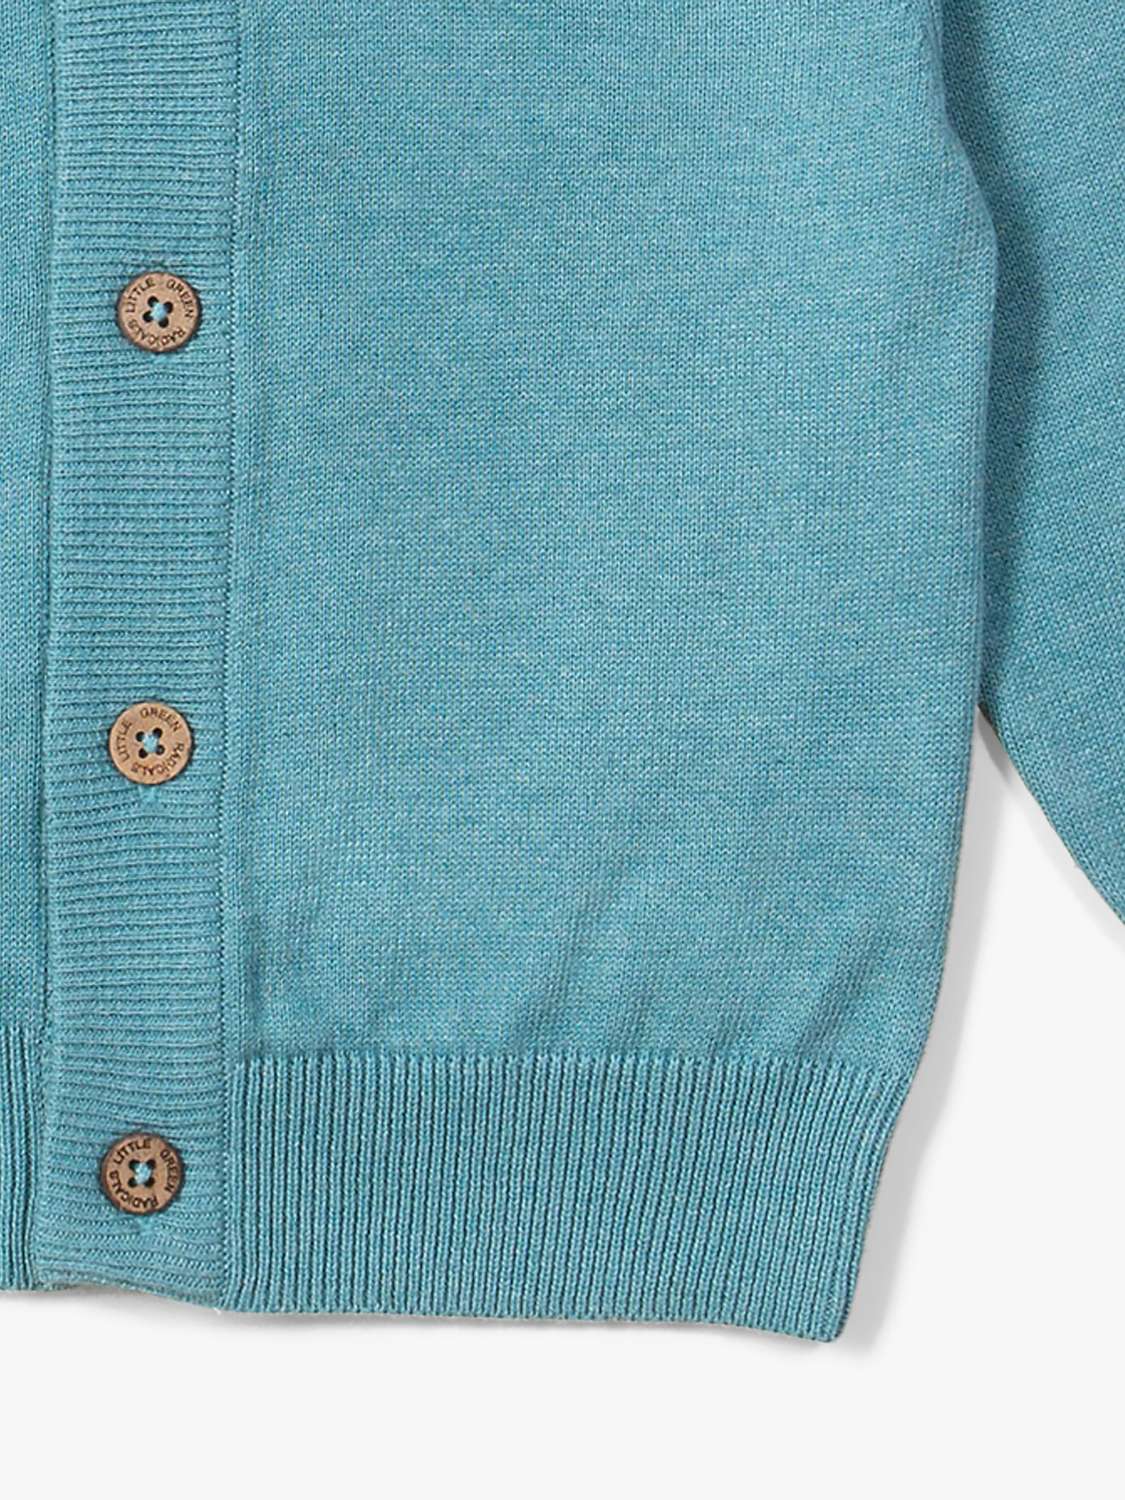 Buy Little Green Radicals Baby Organic Cotton From One To Another Sunshine Knit Cardigan, Blue Online at johnlewis.com